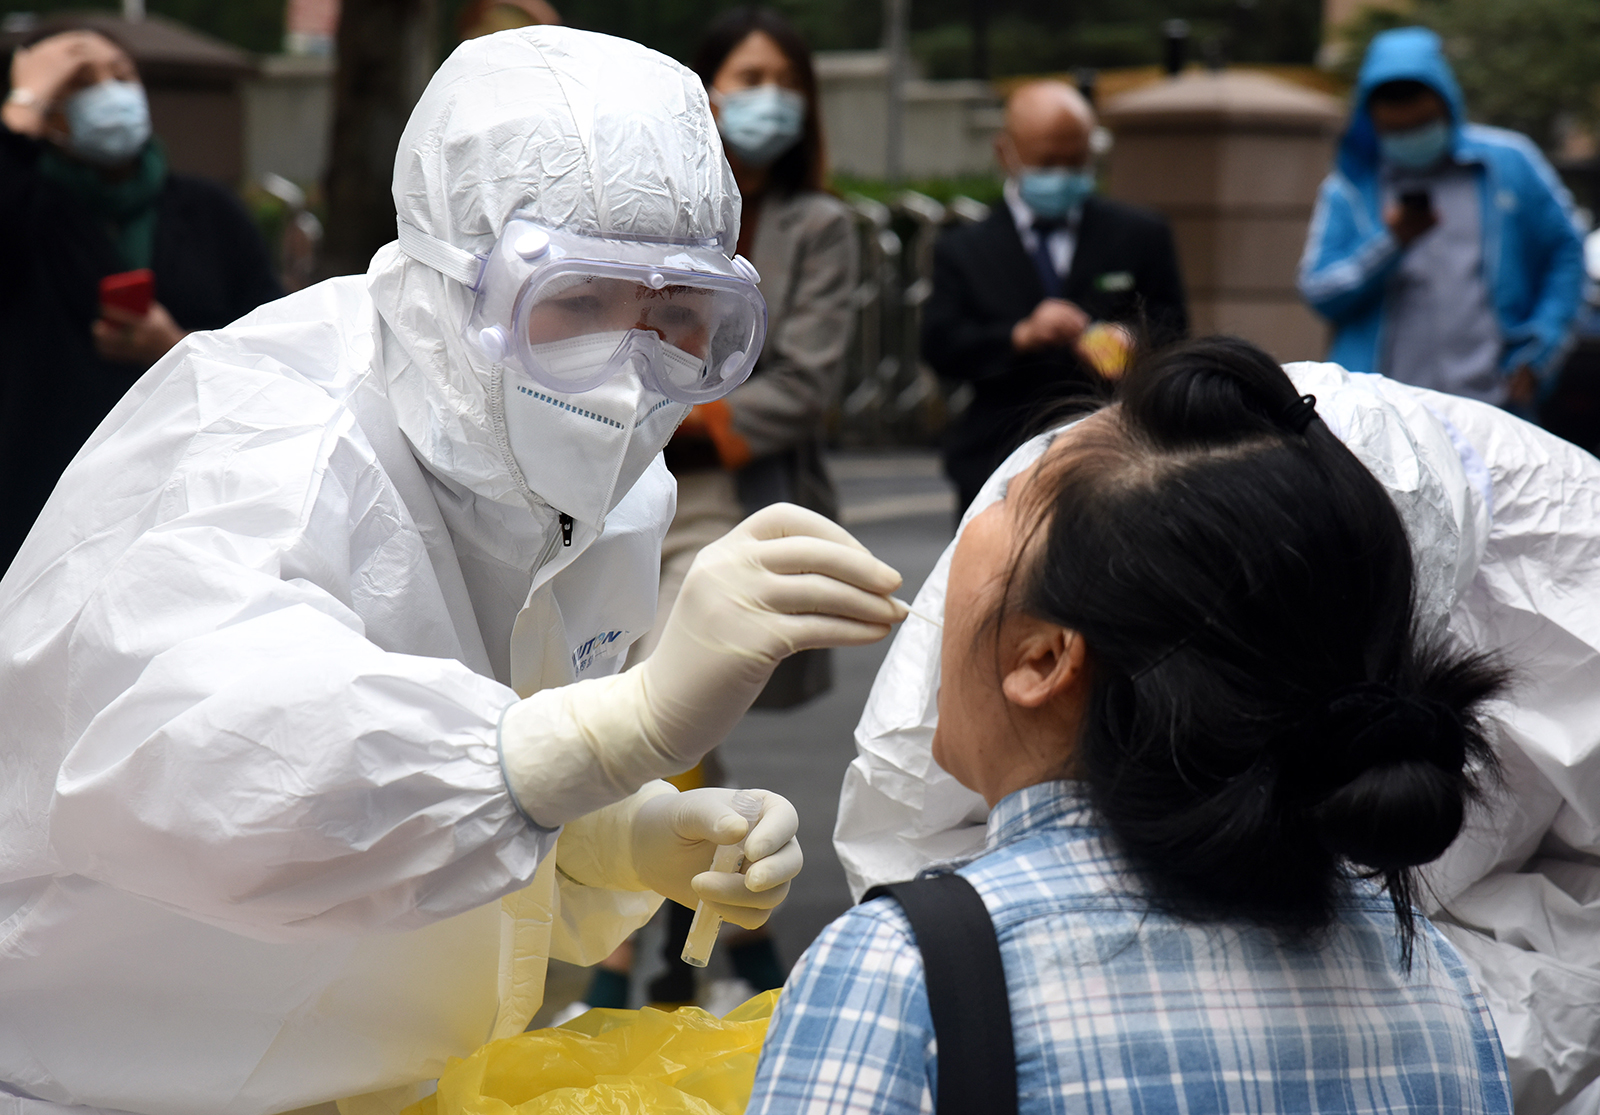 A health worker takes a swab sample from a citizen for a Covid-19 test in Qingdao, China, on October 12.